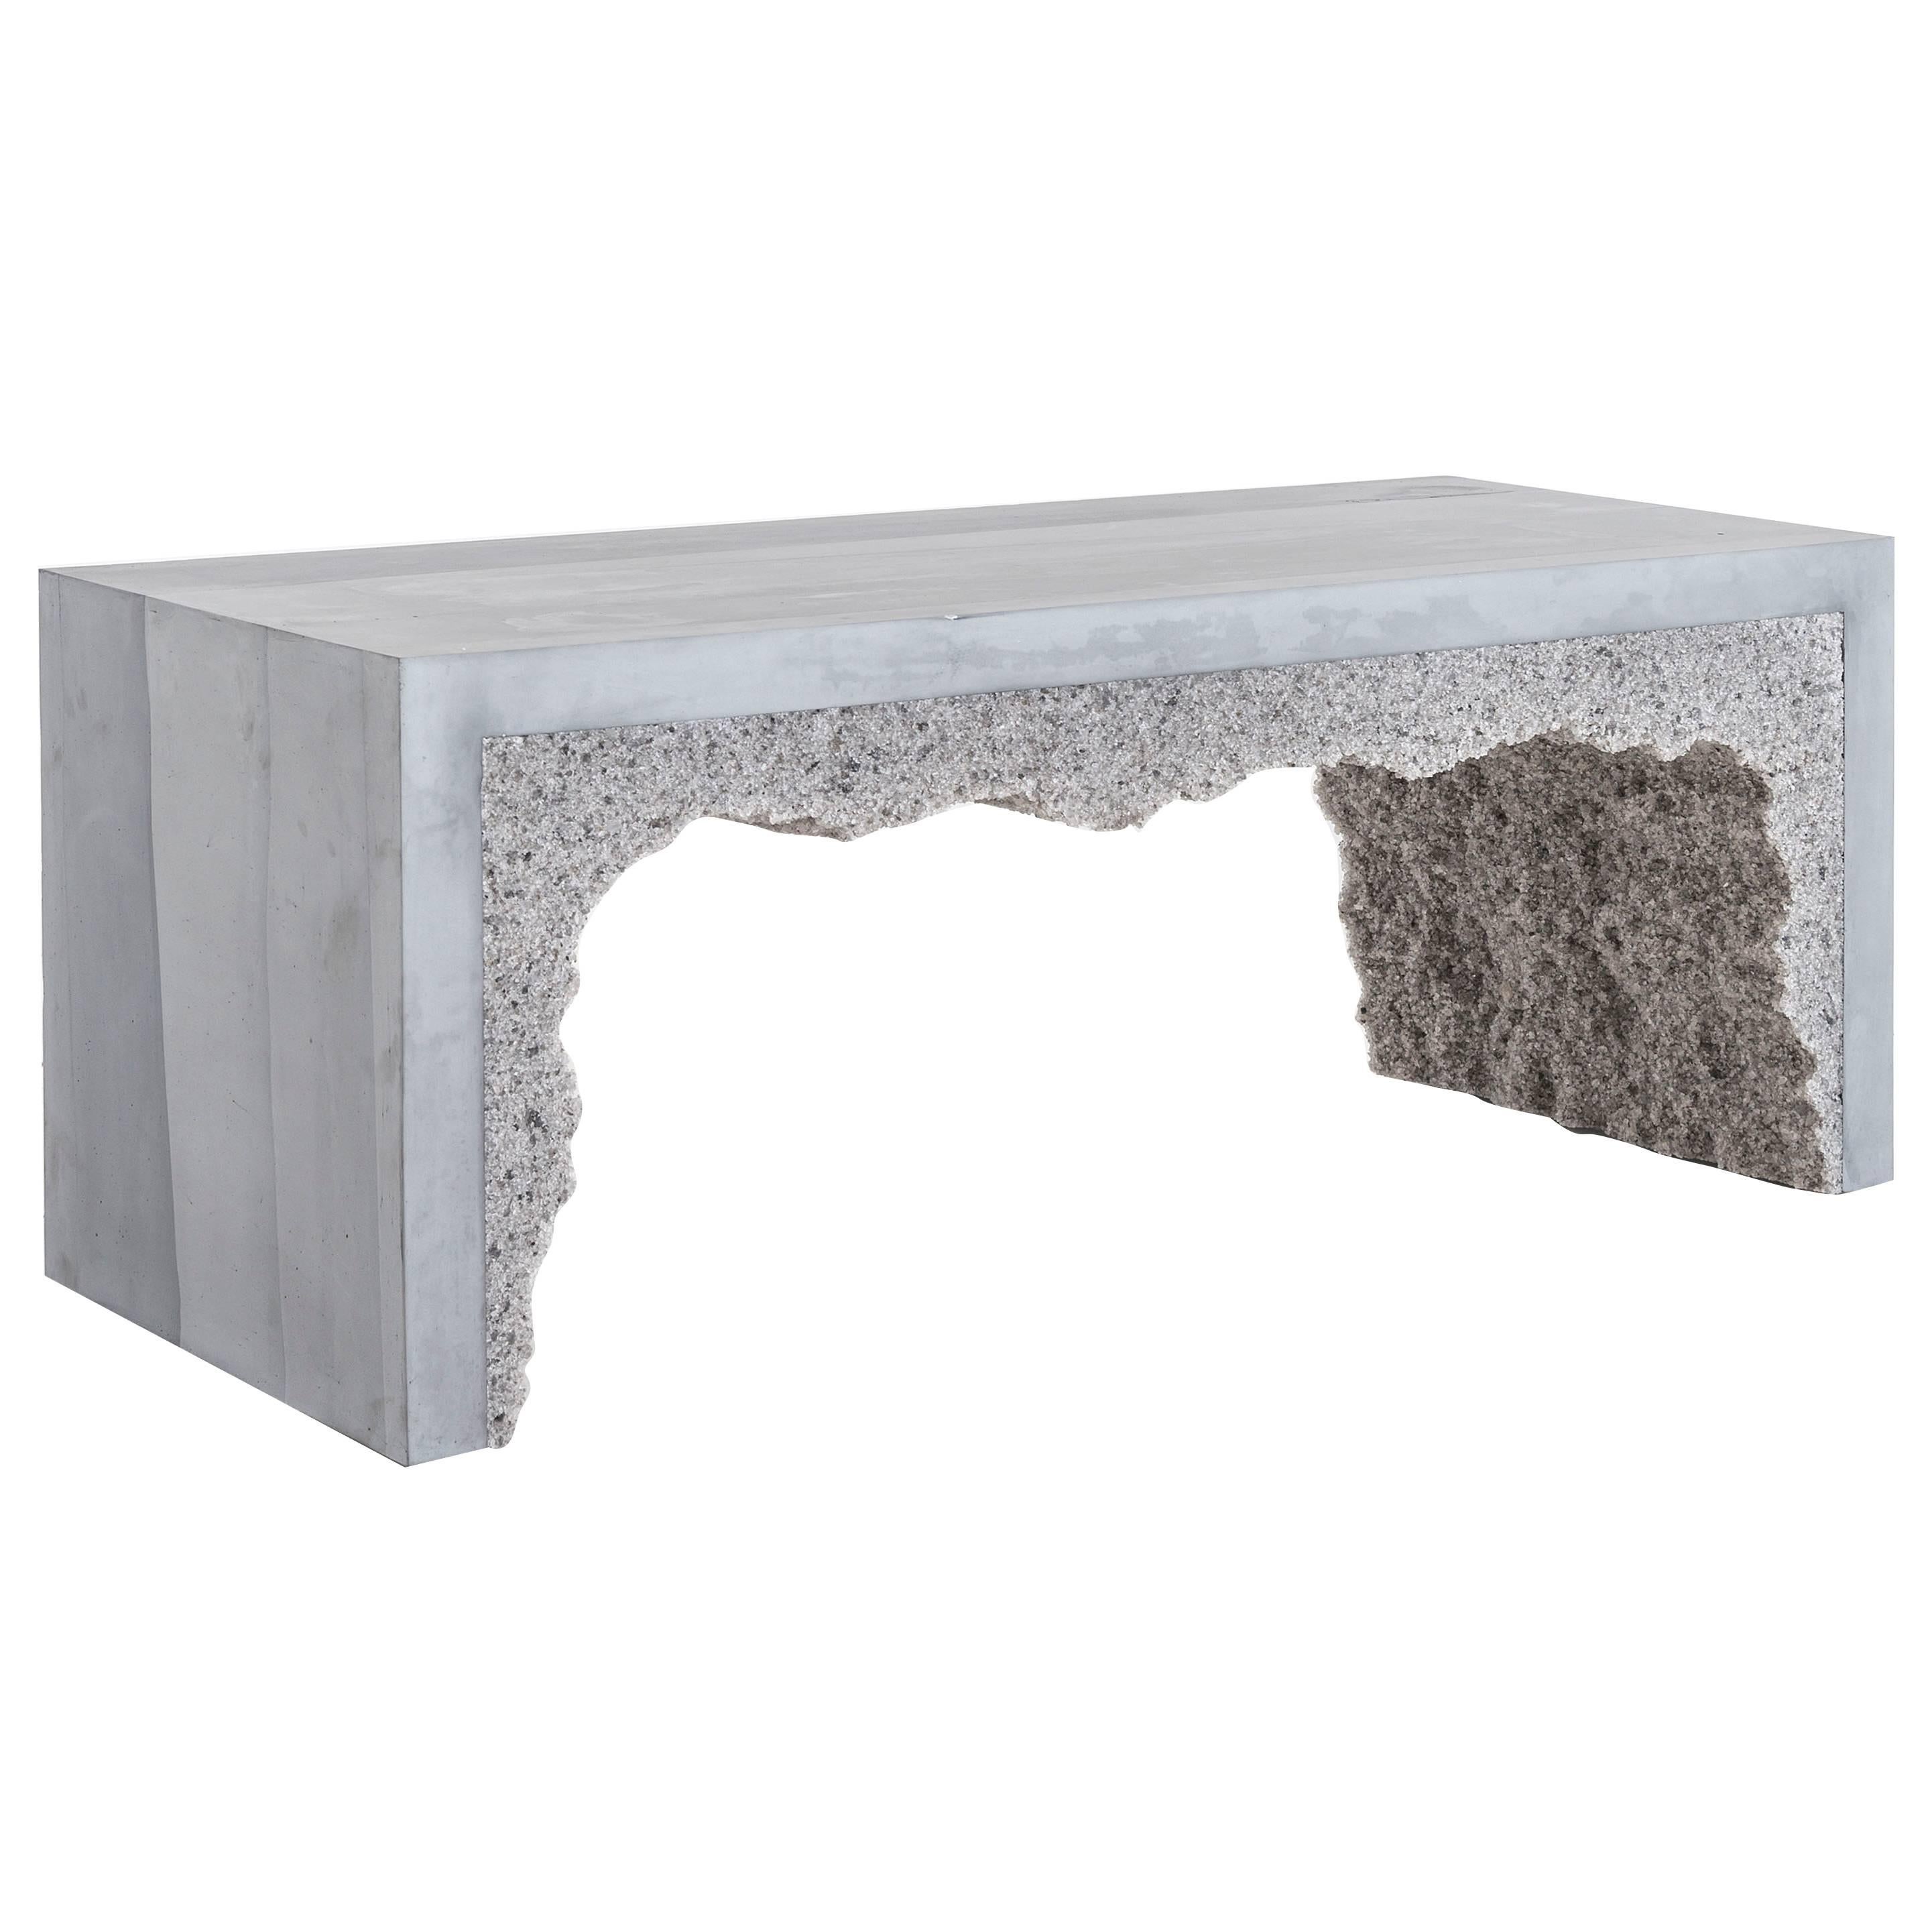 Grey Cement and Grey Rock Salt Bench For Sale